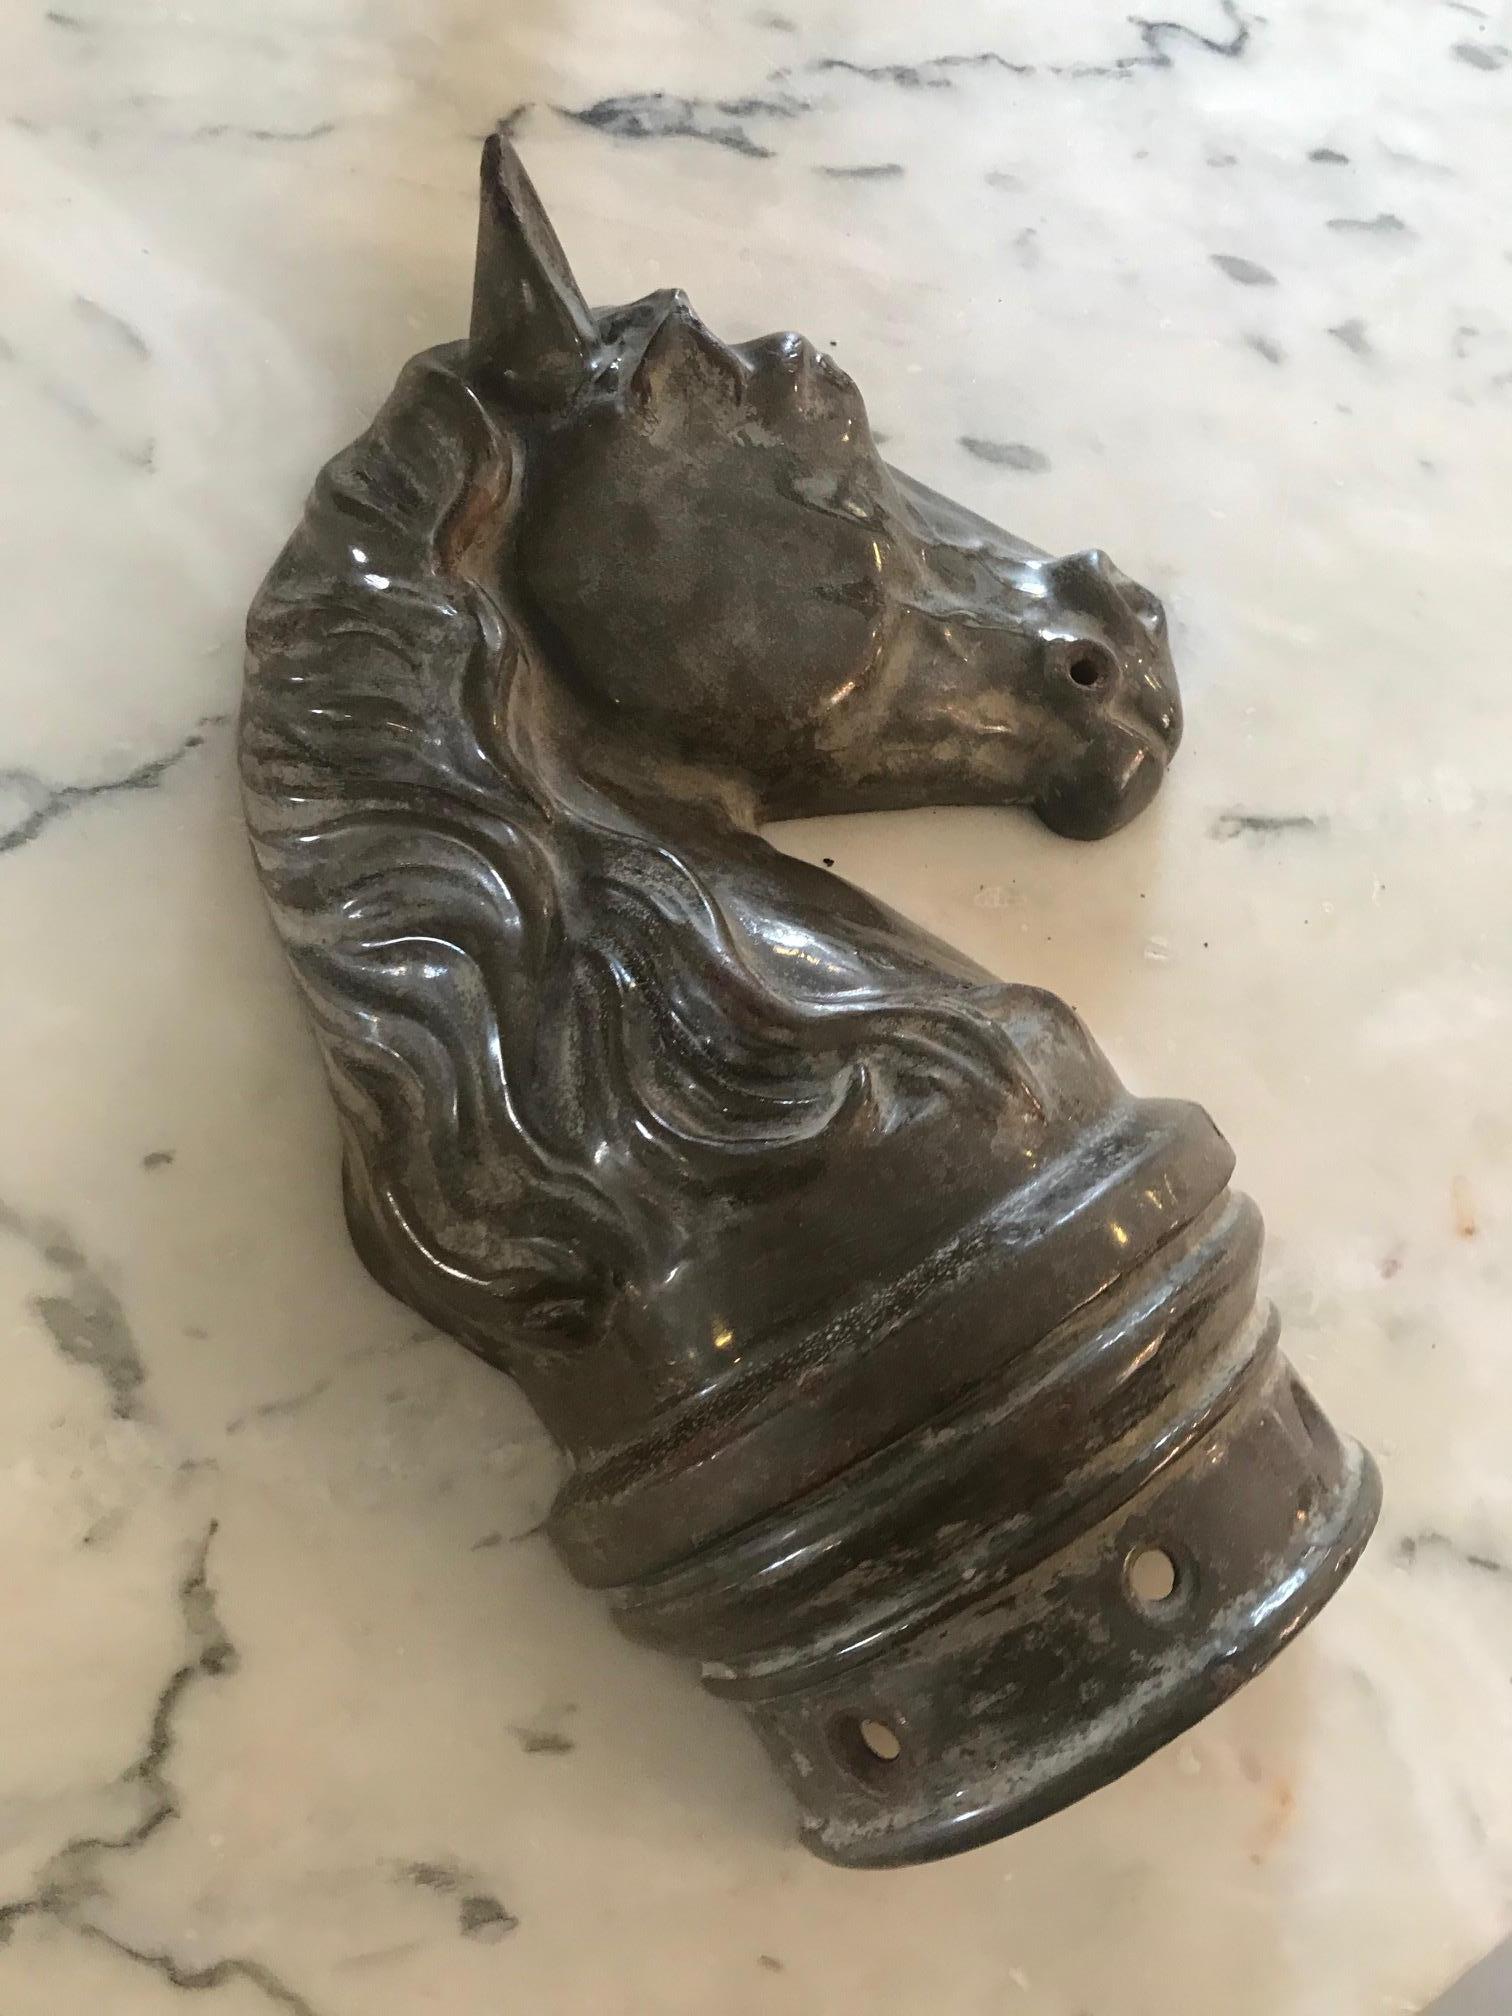 20th century French ceramic iron head's horse ornament.
Placed as an ornament in front of stables.
Good quality and condition.
There is four holes, one in the mouth and three at the bottom.